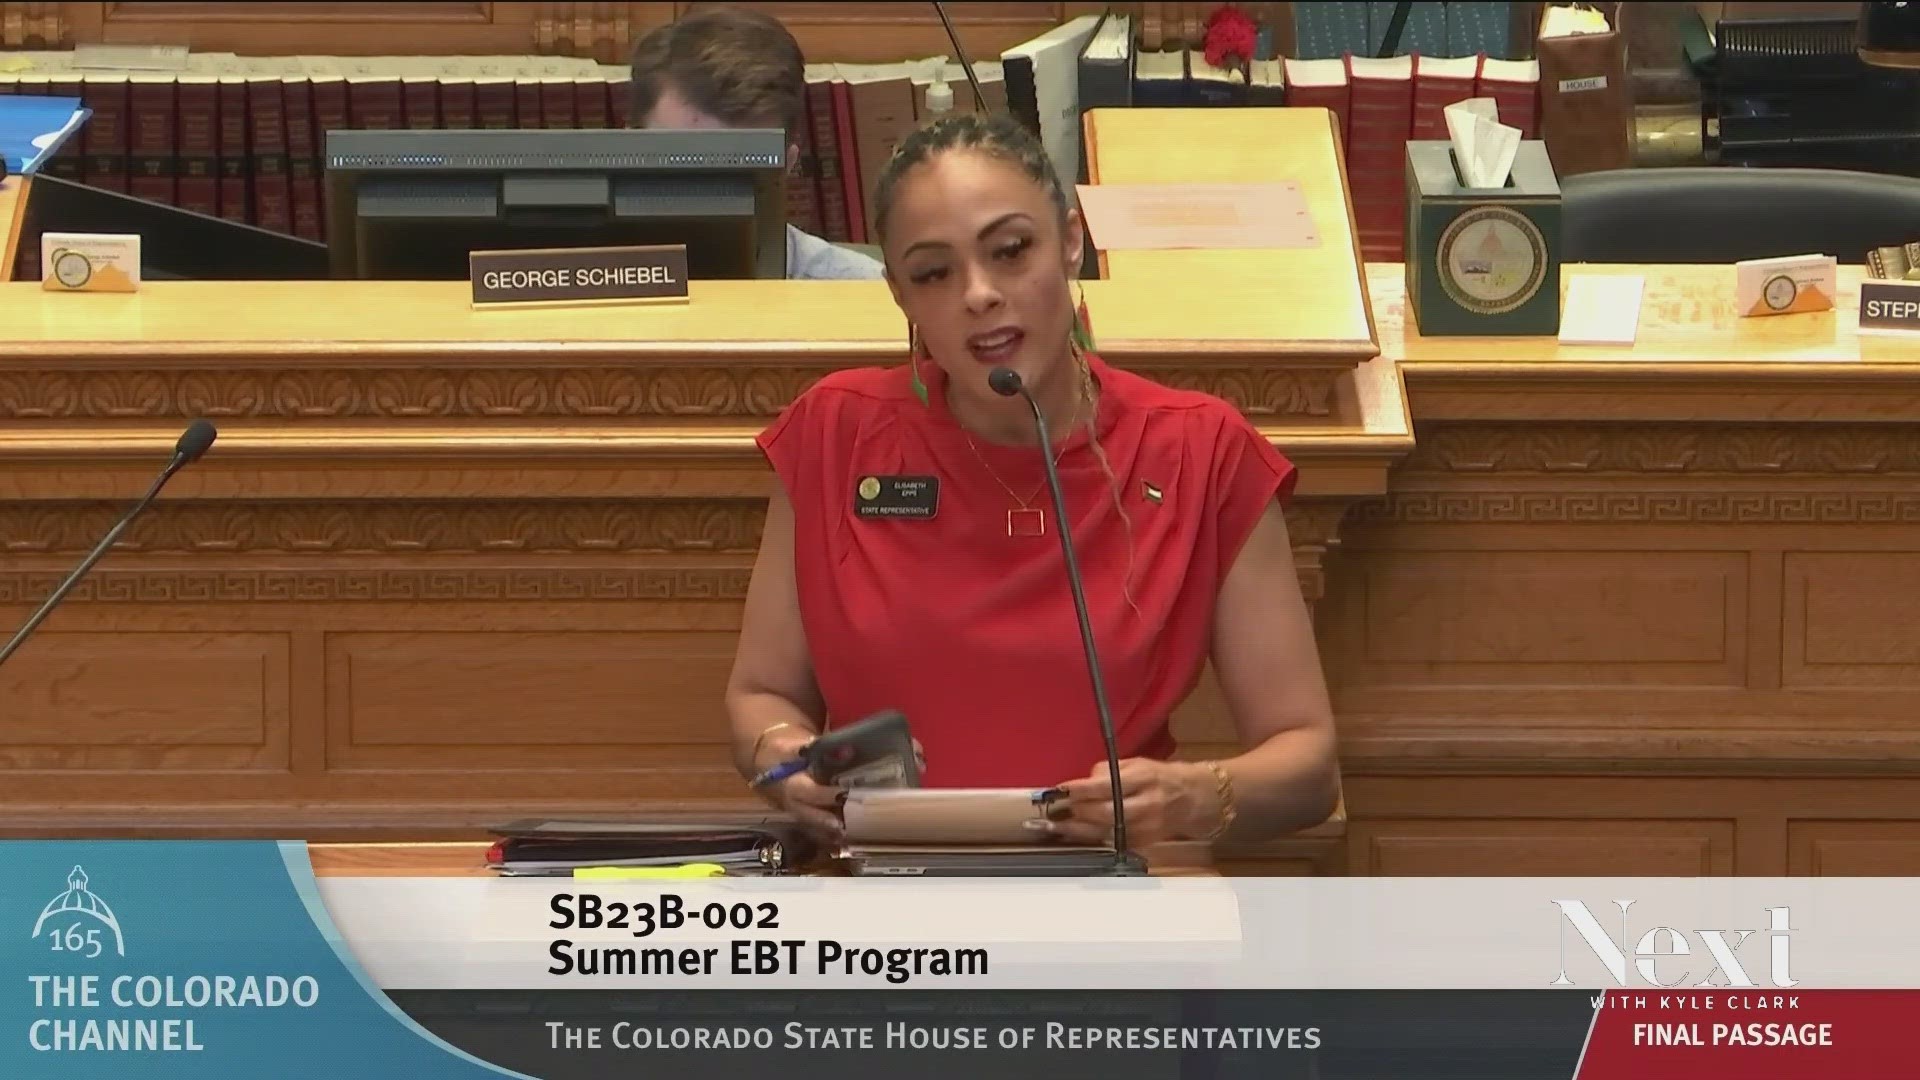 On Monday, Rep. Elisabeth Epps used time in the special session to speak on Palestine before joining pro-Palestinian protestors in the House gallery.